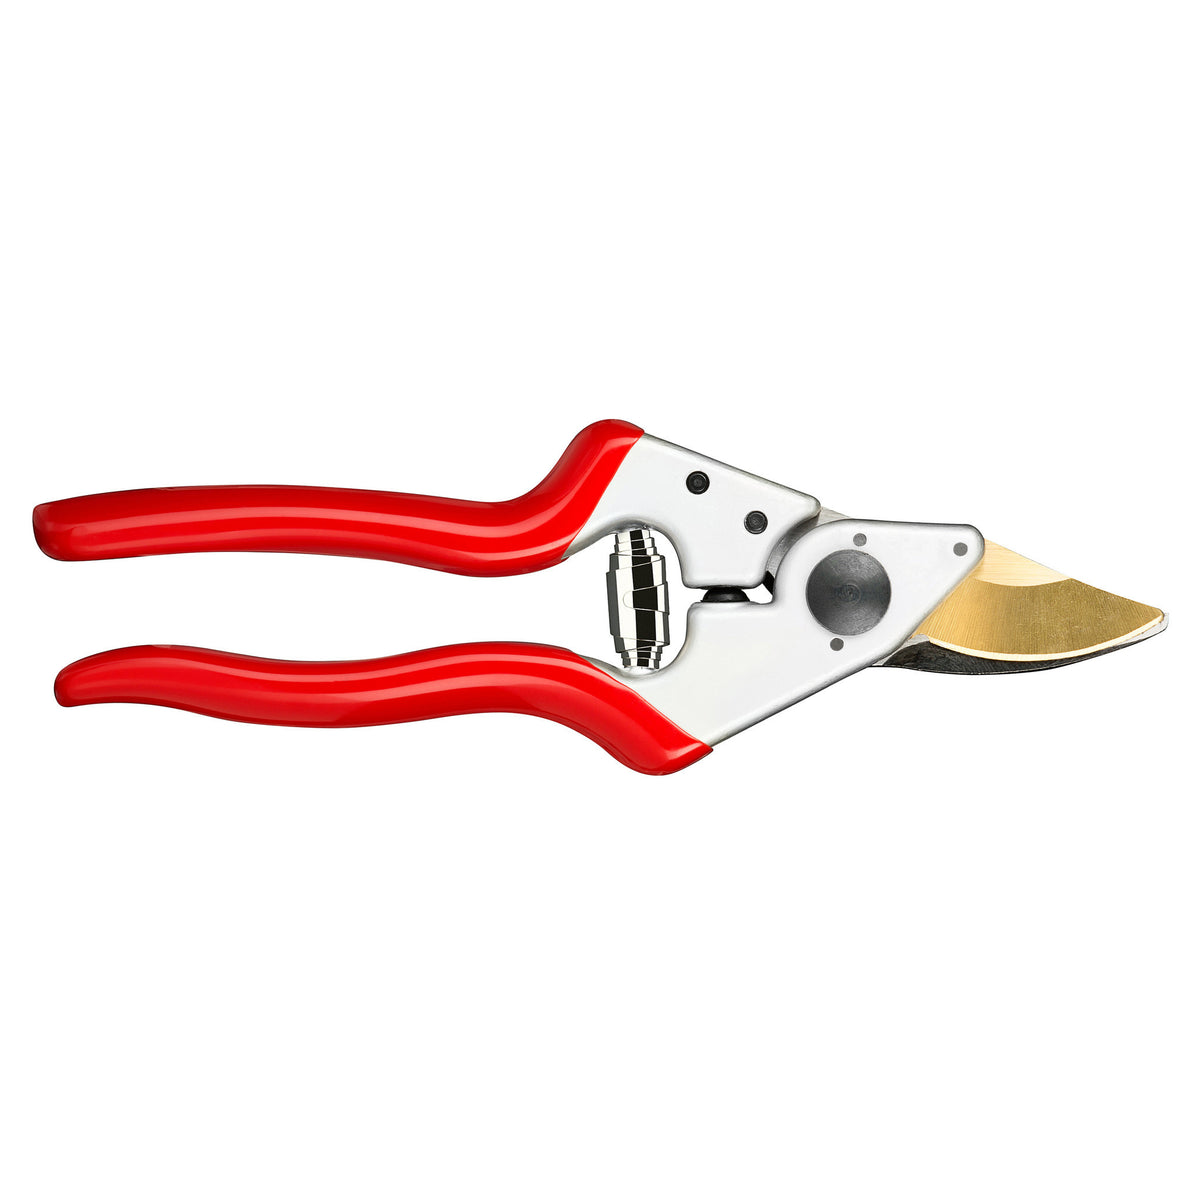 PrecisionPRO Bypass Pruning Shears